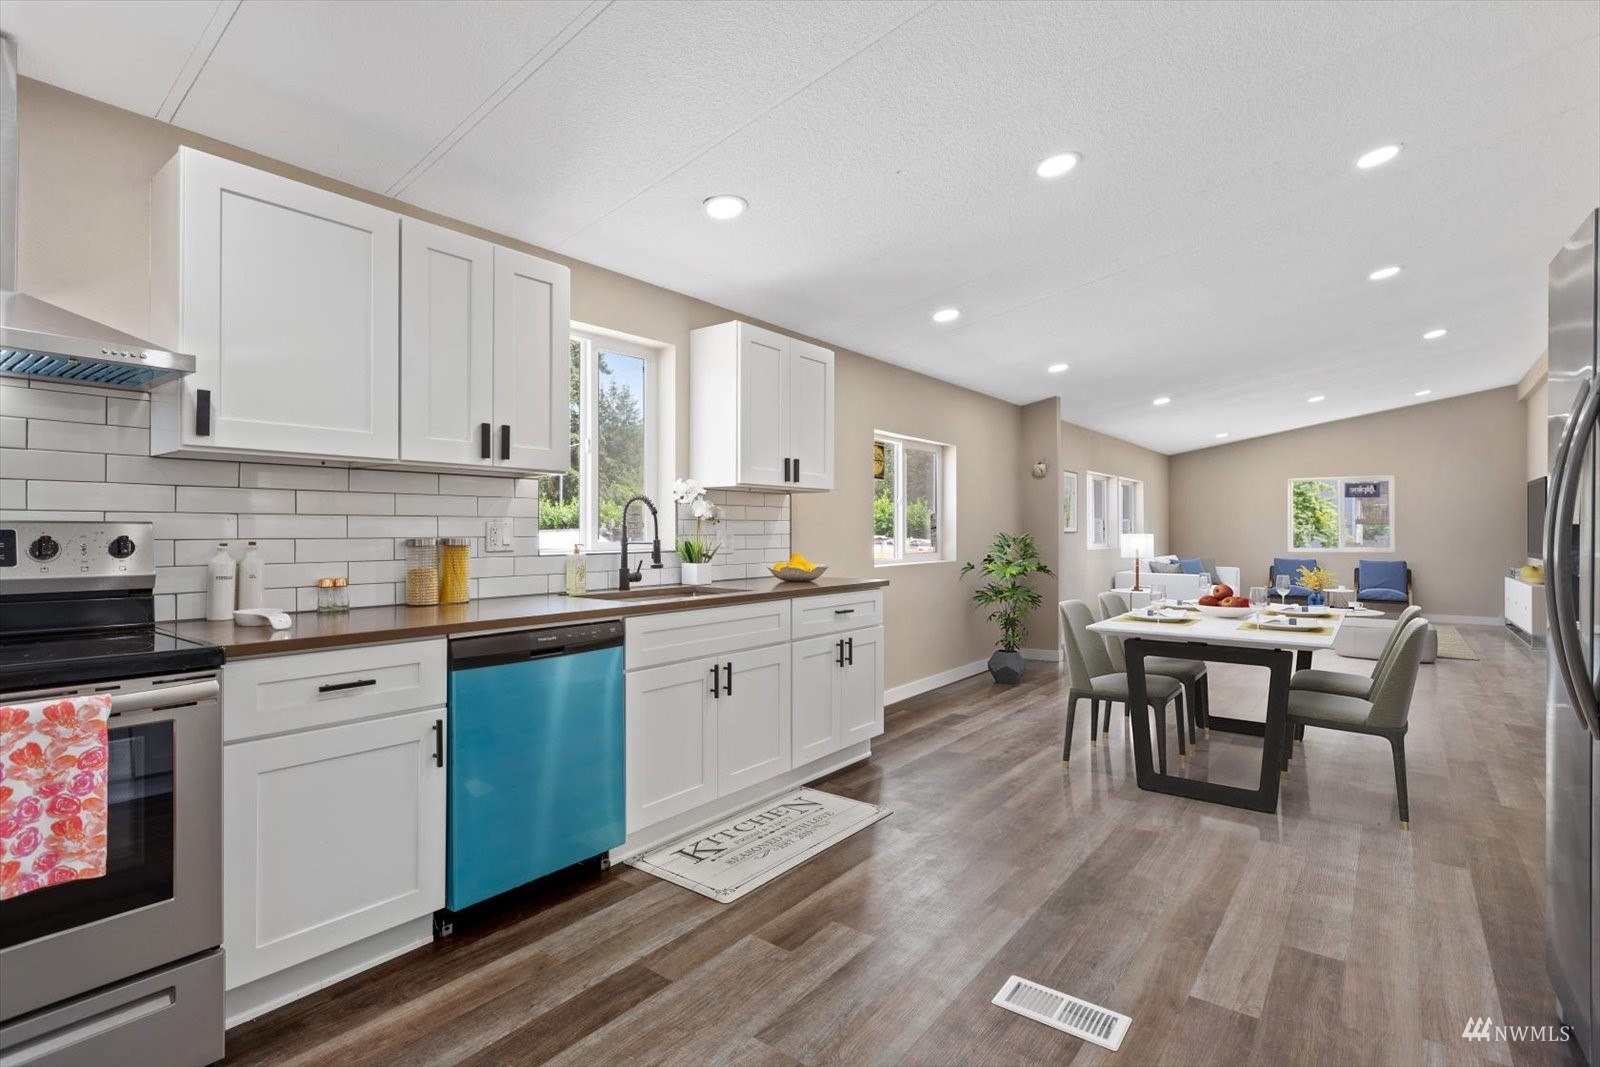 a kitchen with counter space wooden floor dining table and stainless steel appliances